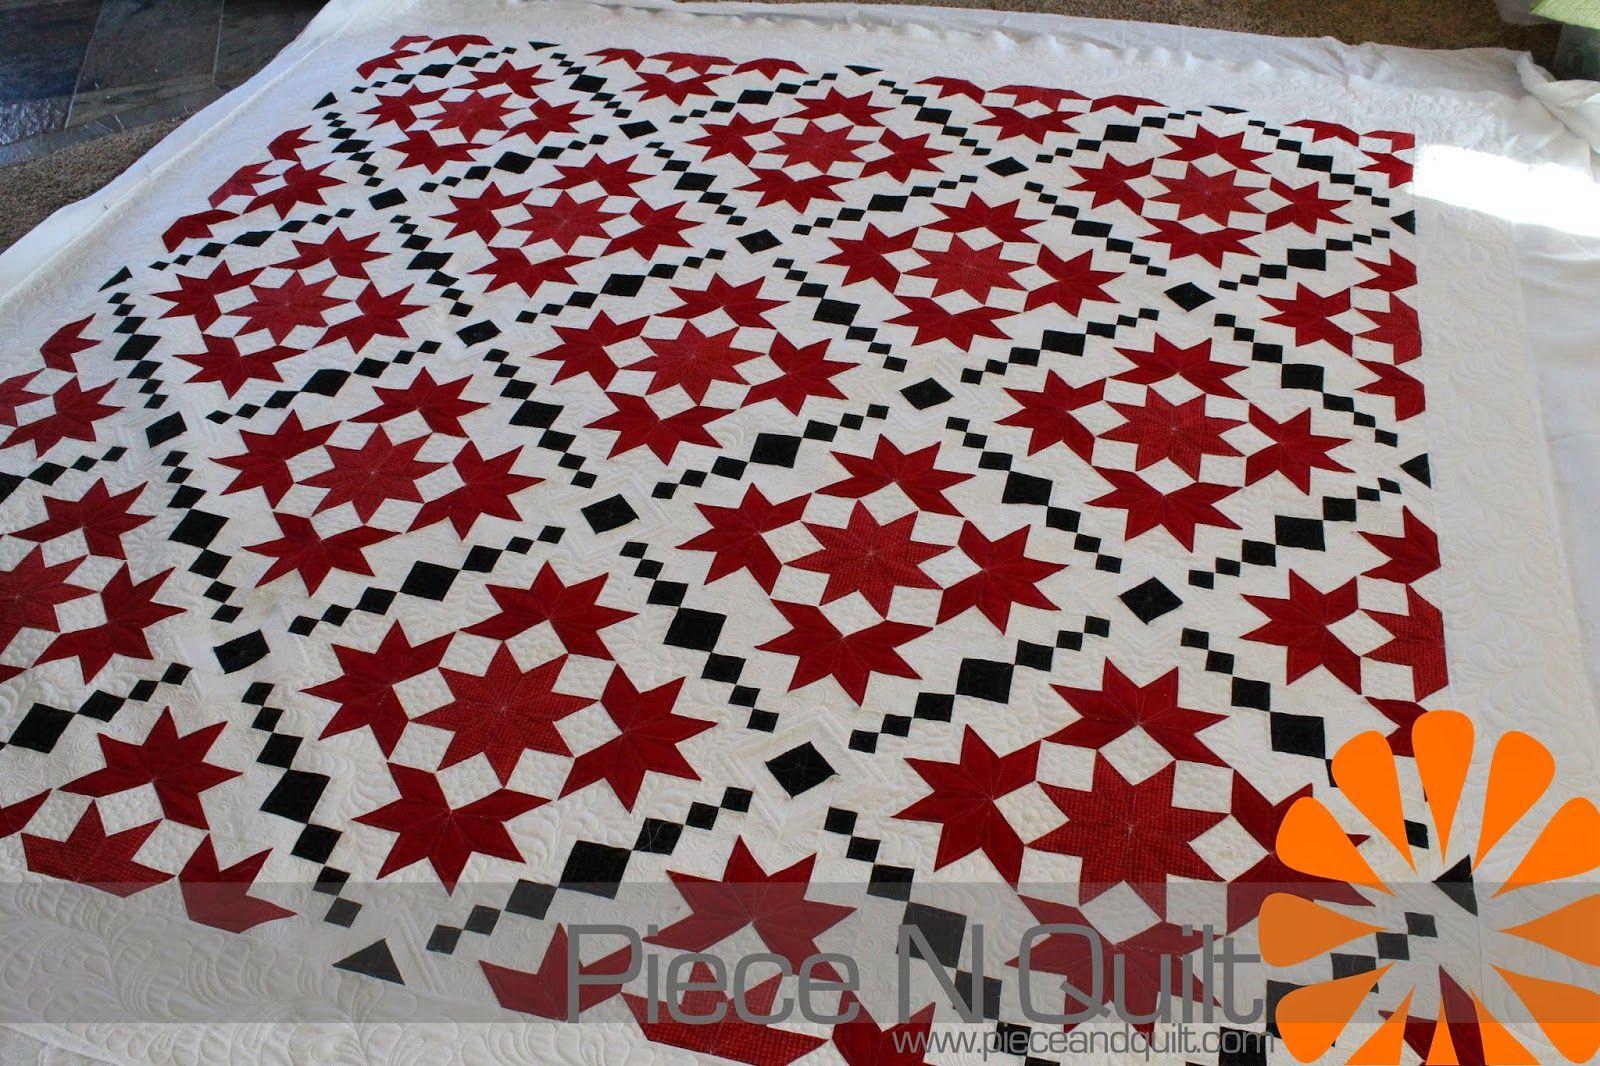 Red White and Black Star Logo - Piece N Quilt: Custom Machine Quilting - Red, White & Black Stars